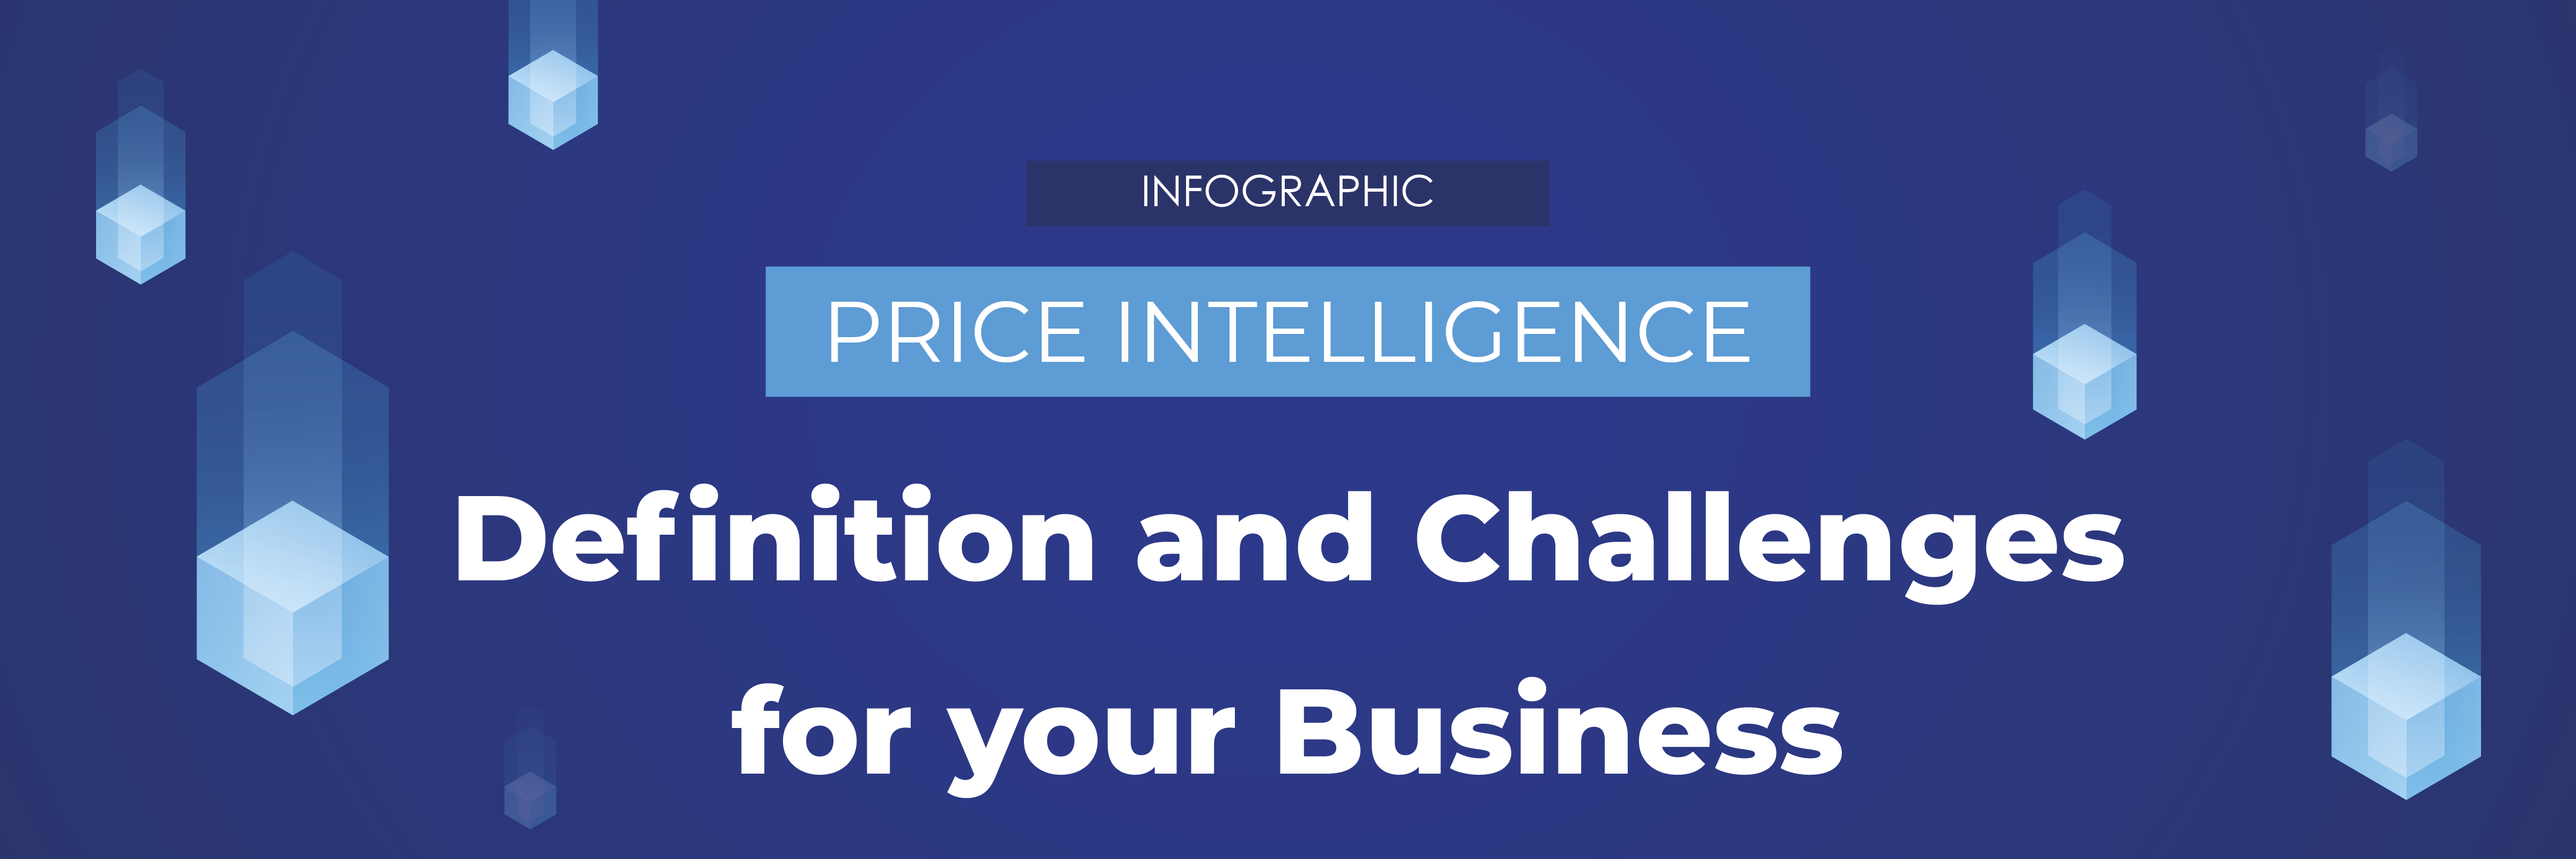 [Infographic] Price Intelligence: what business challenges?